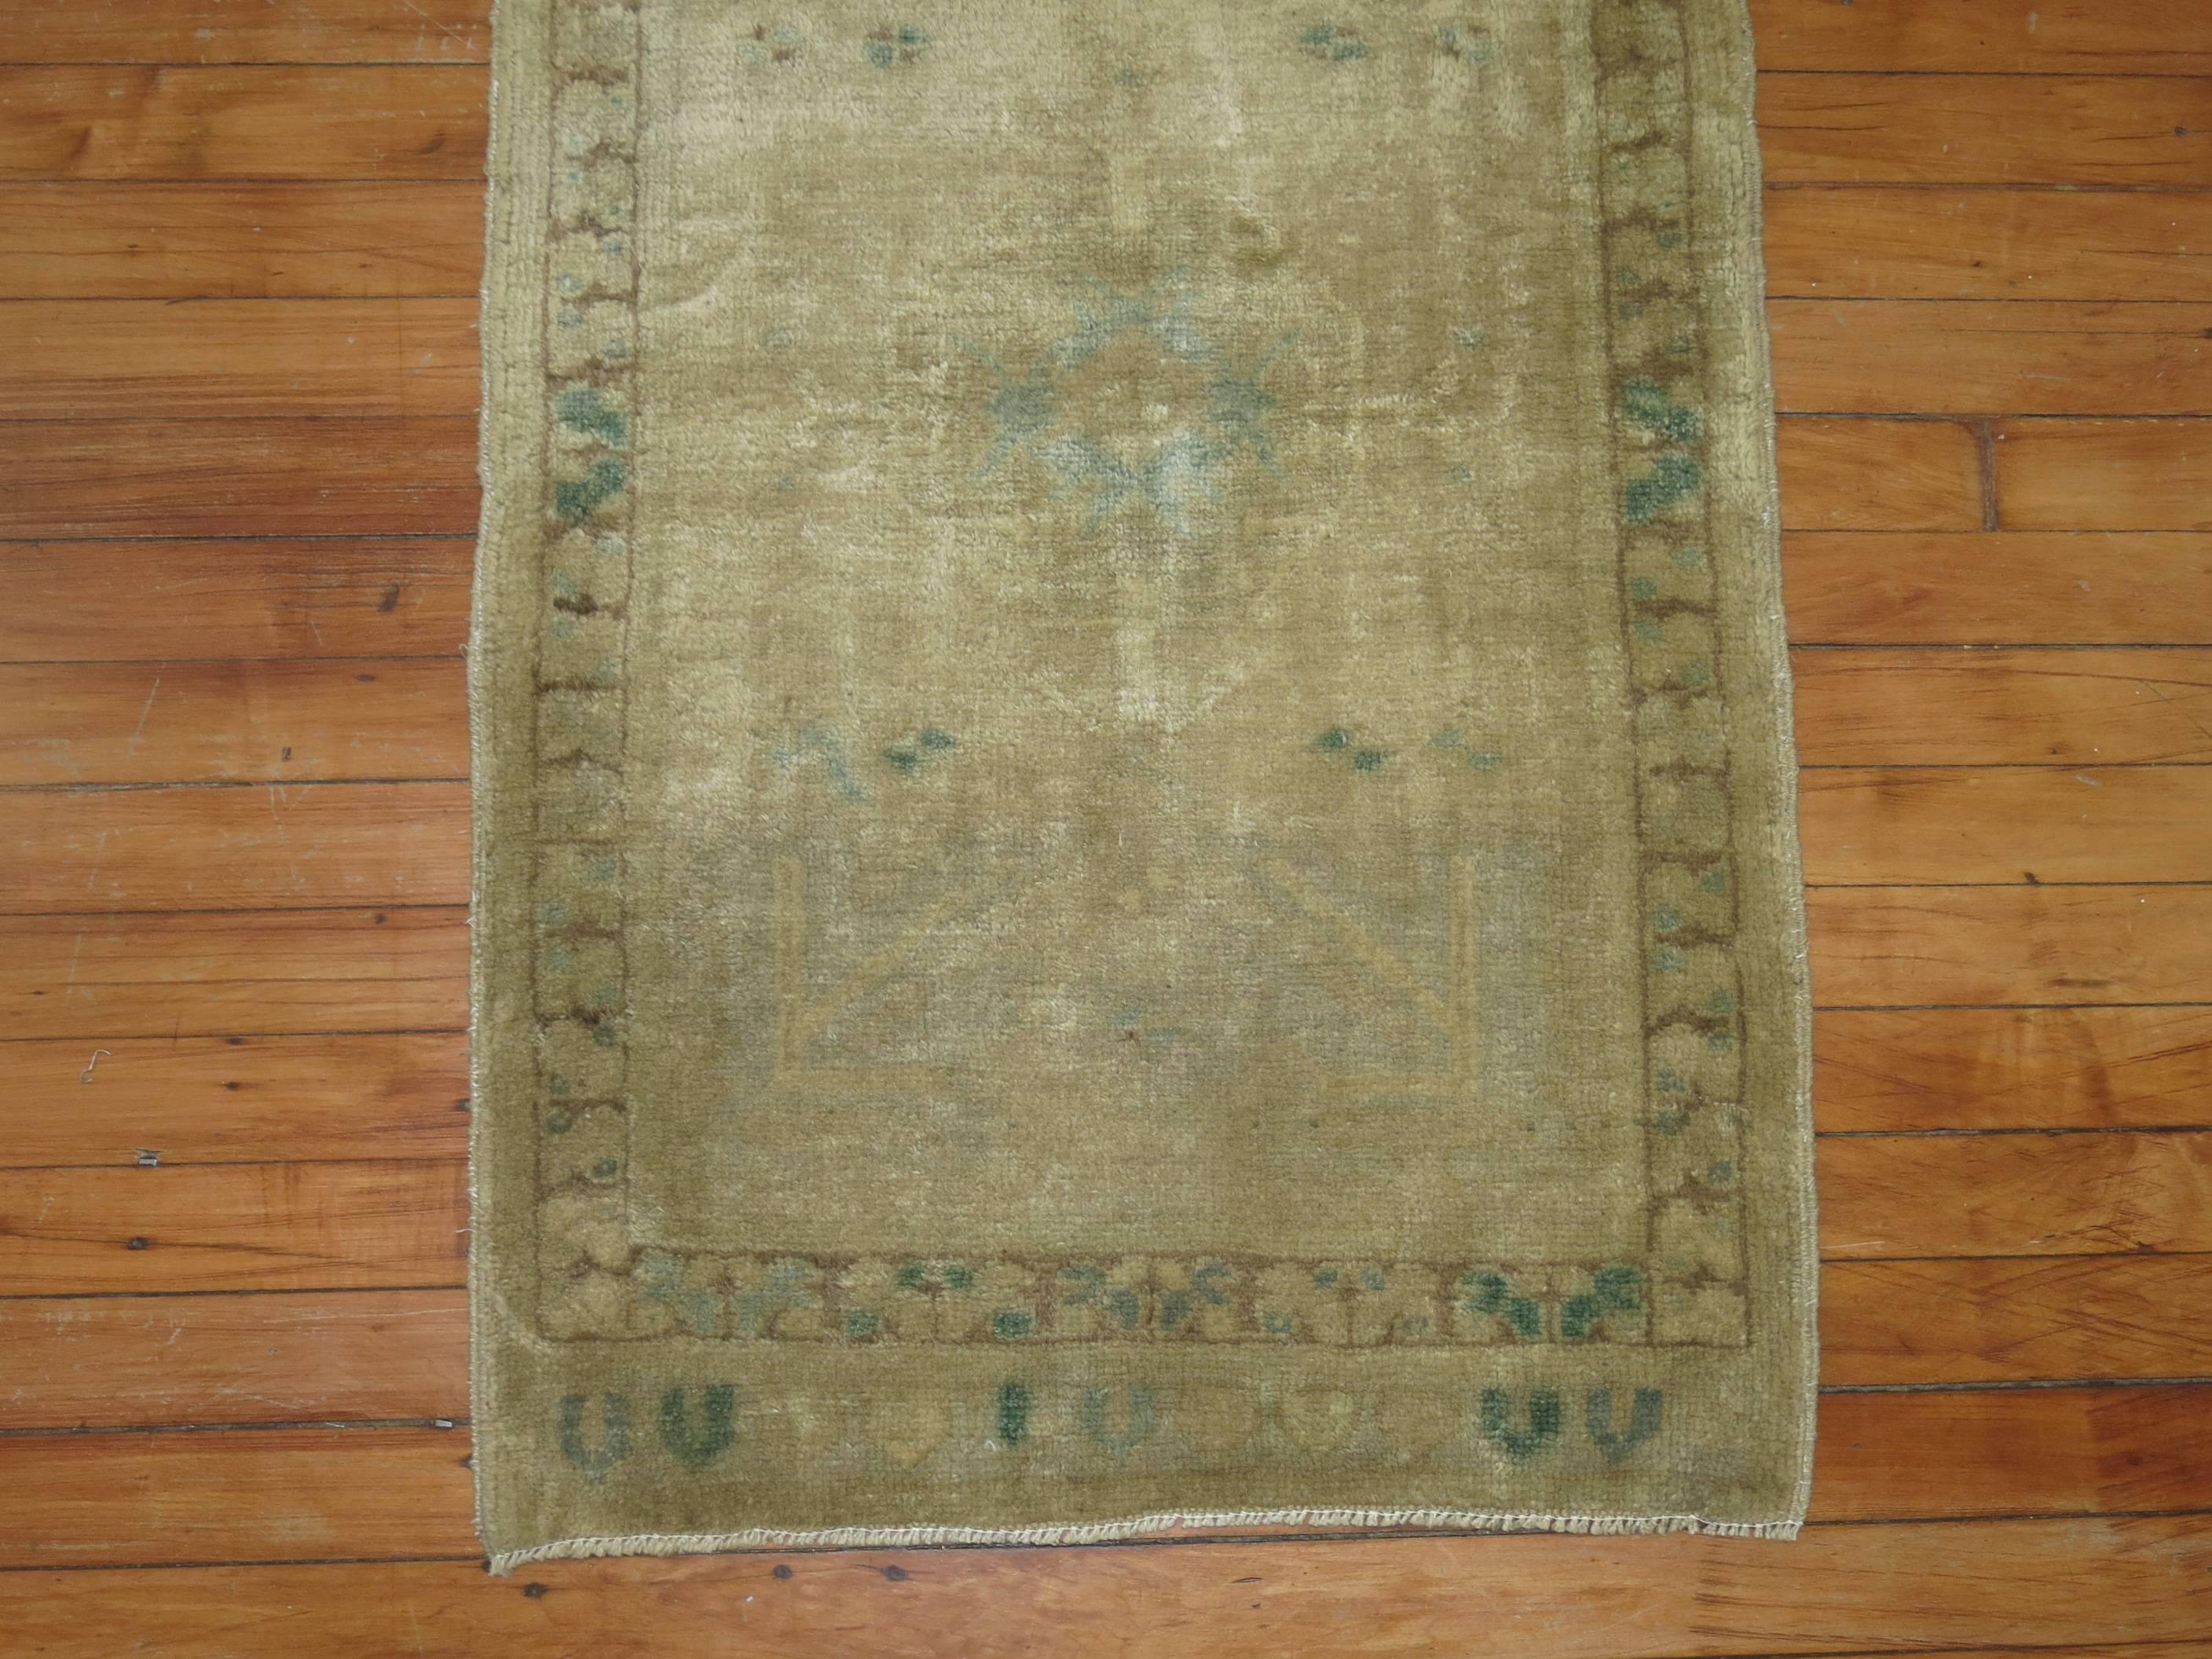 Vintage Oushak rug suitable for a bathroom, powder room or entryway. Pops of blue and green accents.